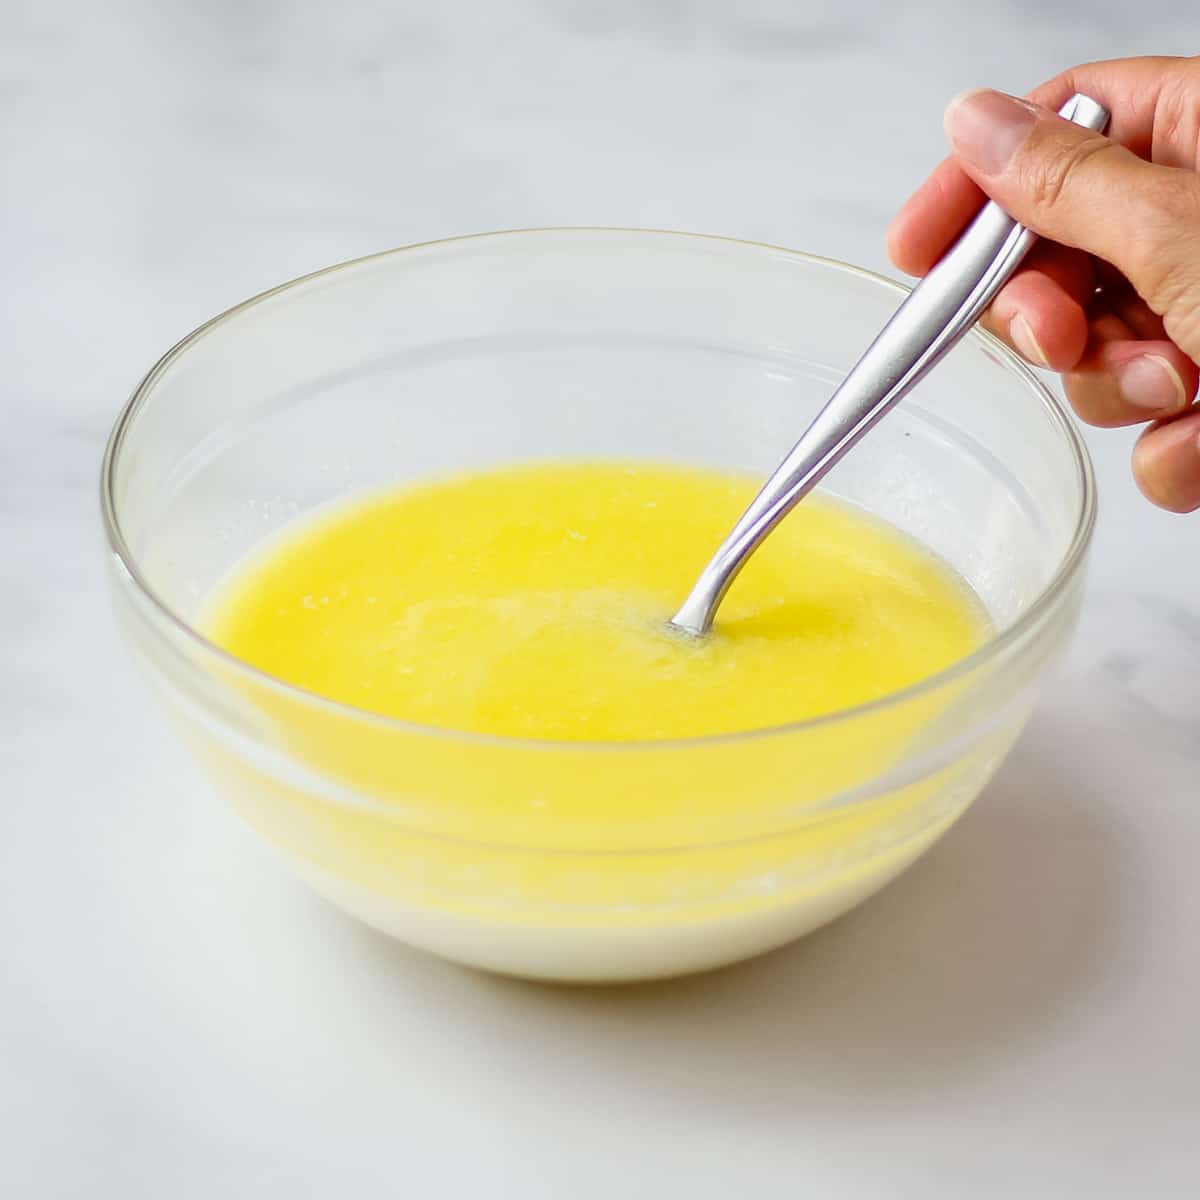 Stirring buttermilk, sugar, and melted butter in a clear glass bowl.